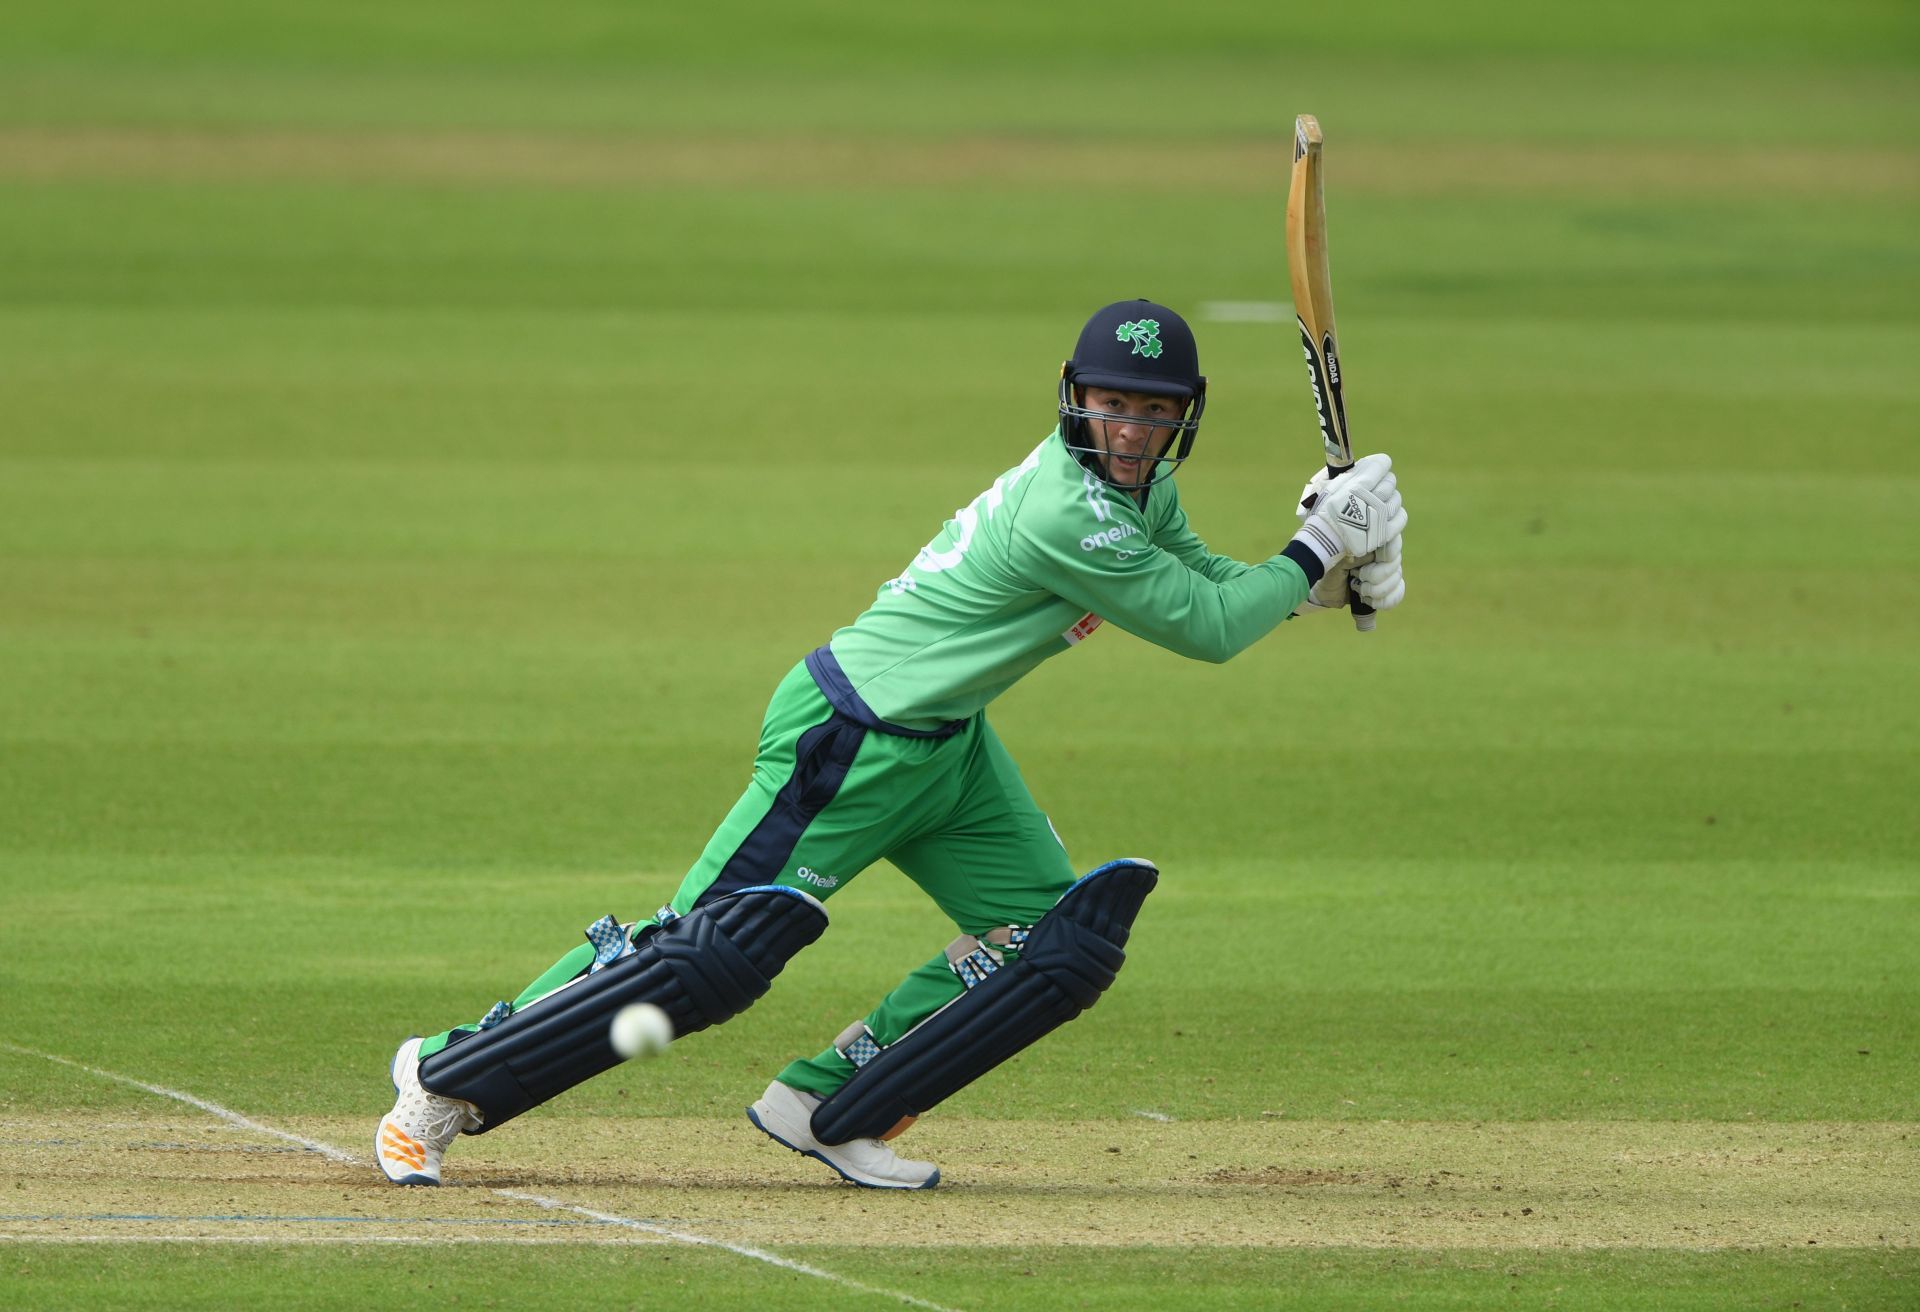 Curtis Campher is a vital member of the Irish batting lineup